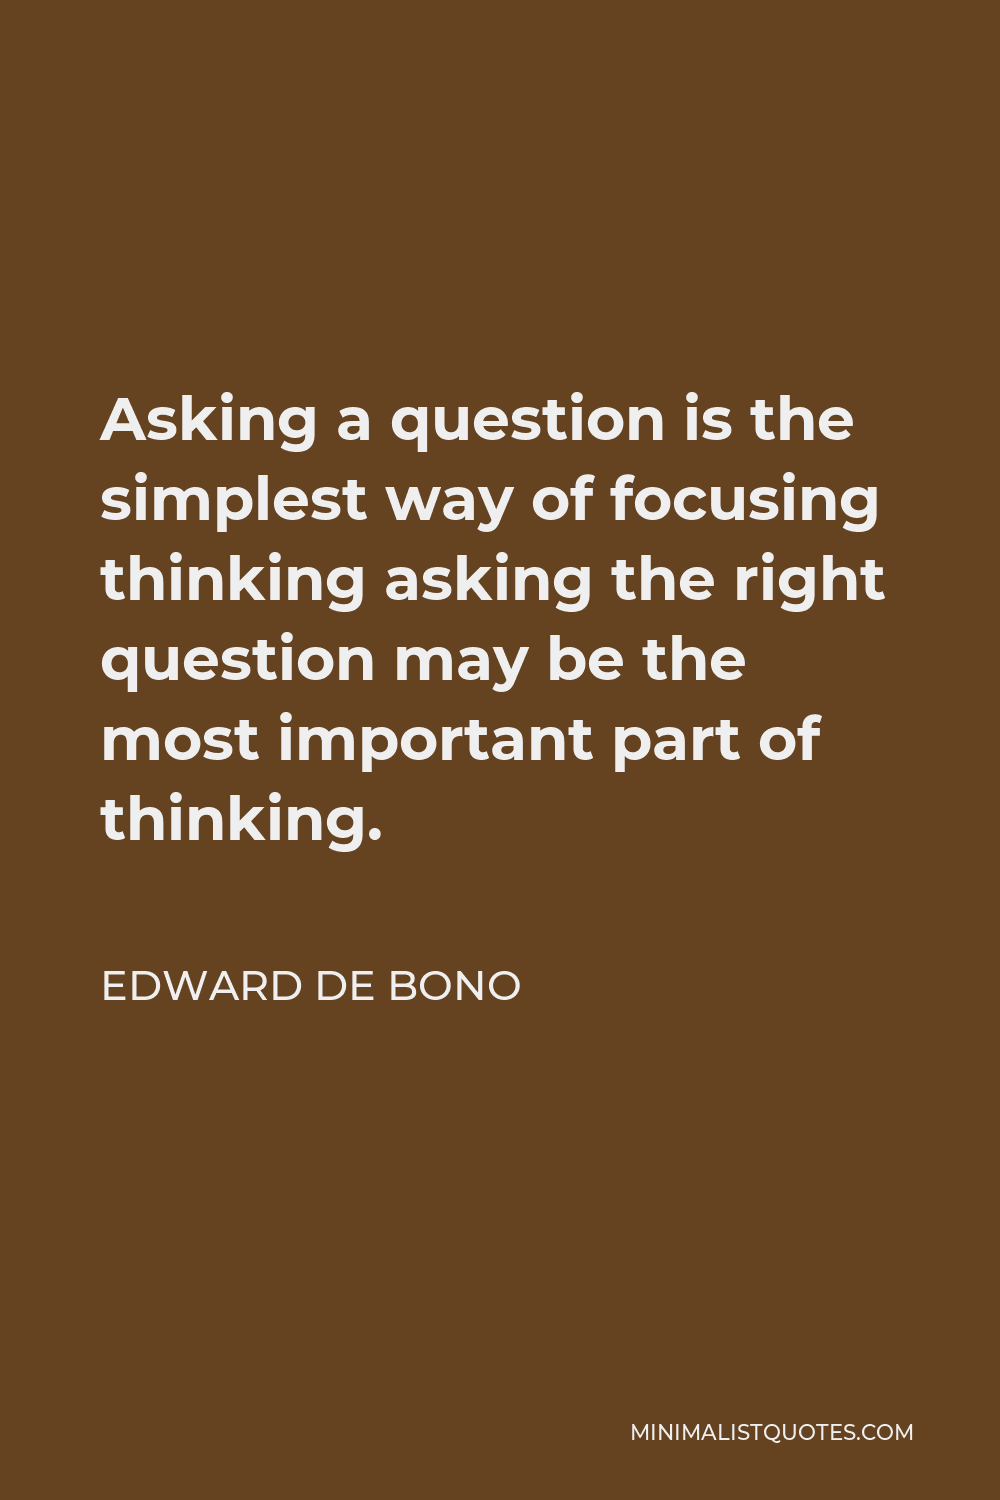 Edward de Bono Quote - Asking a question is the simplest way of focusing thinking asking the right question may be the most important part of thinking.